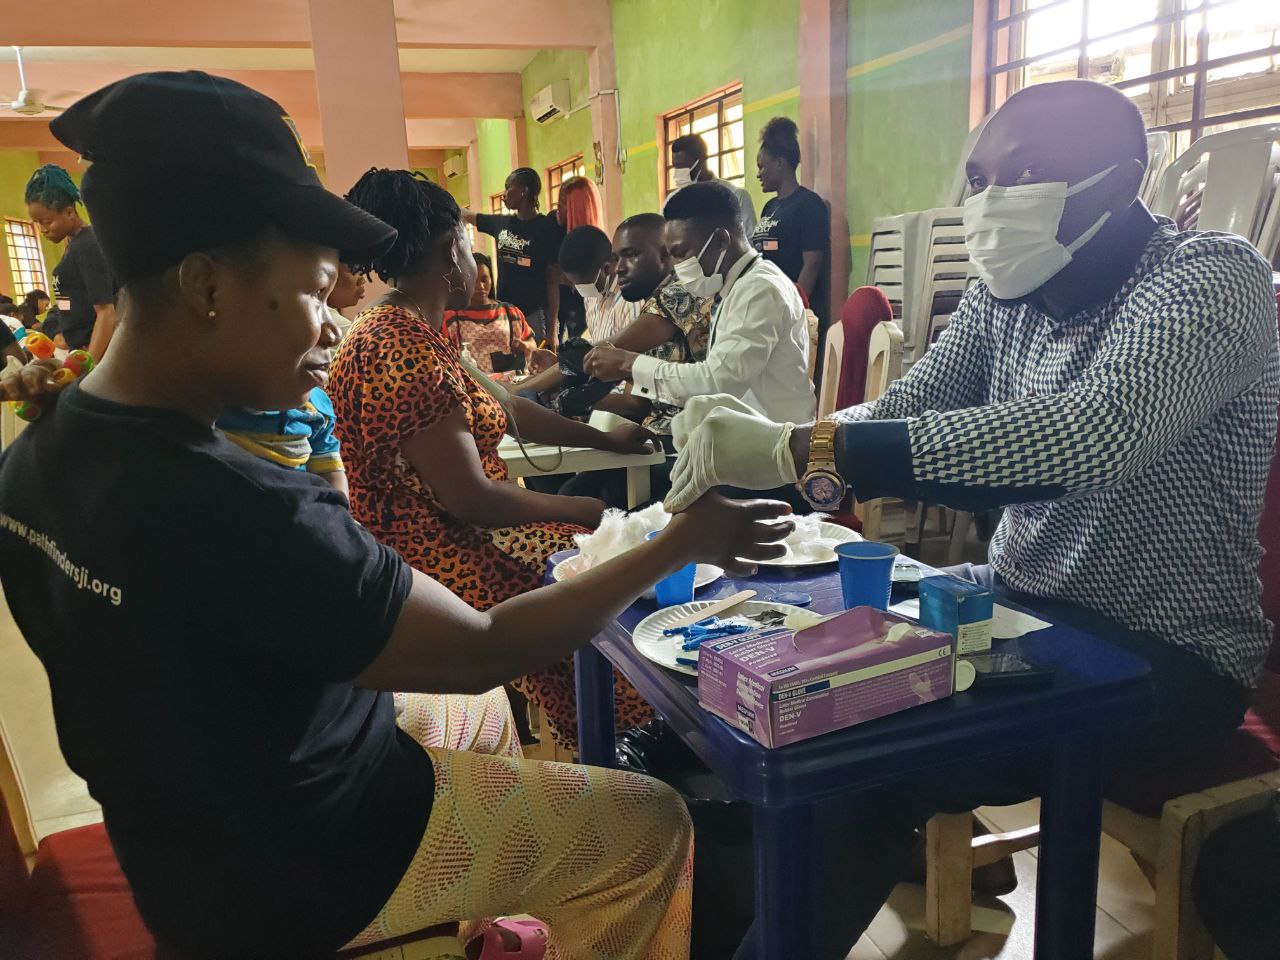 PJI Organizes Medical Outreach for 30 Beneficiaries of ‘The Freedom Project’